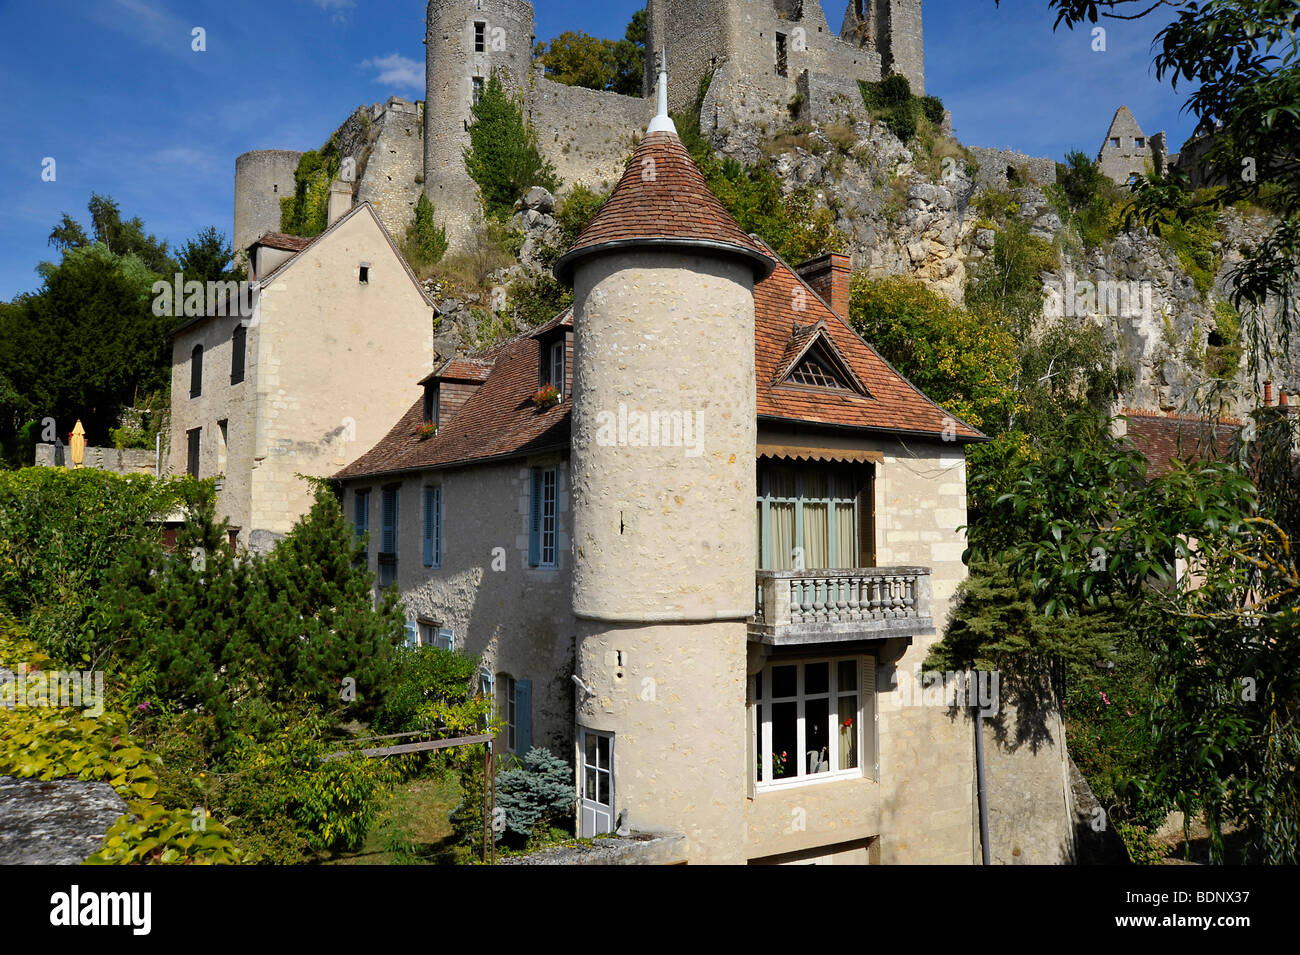 Beautiful medieval buildings  and ruins of the old town of Angles sur l' Anglin, France. Stock Photo